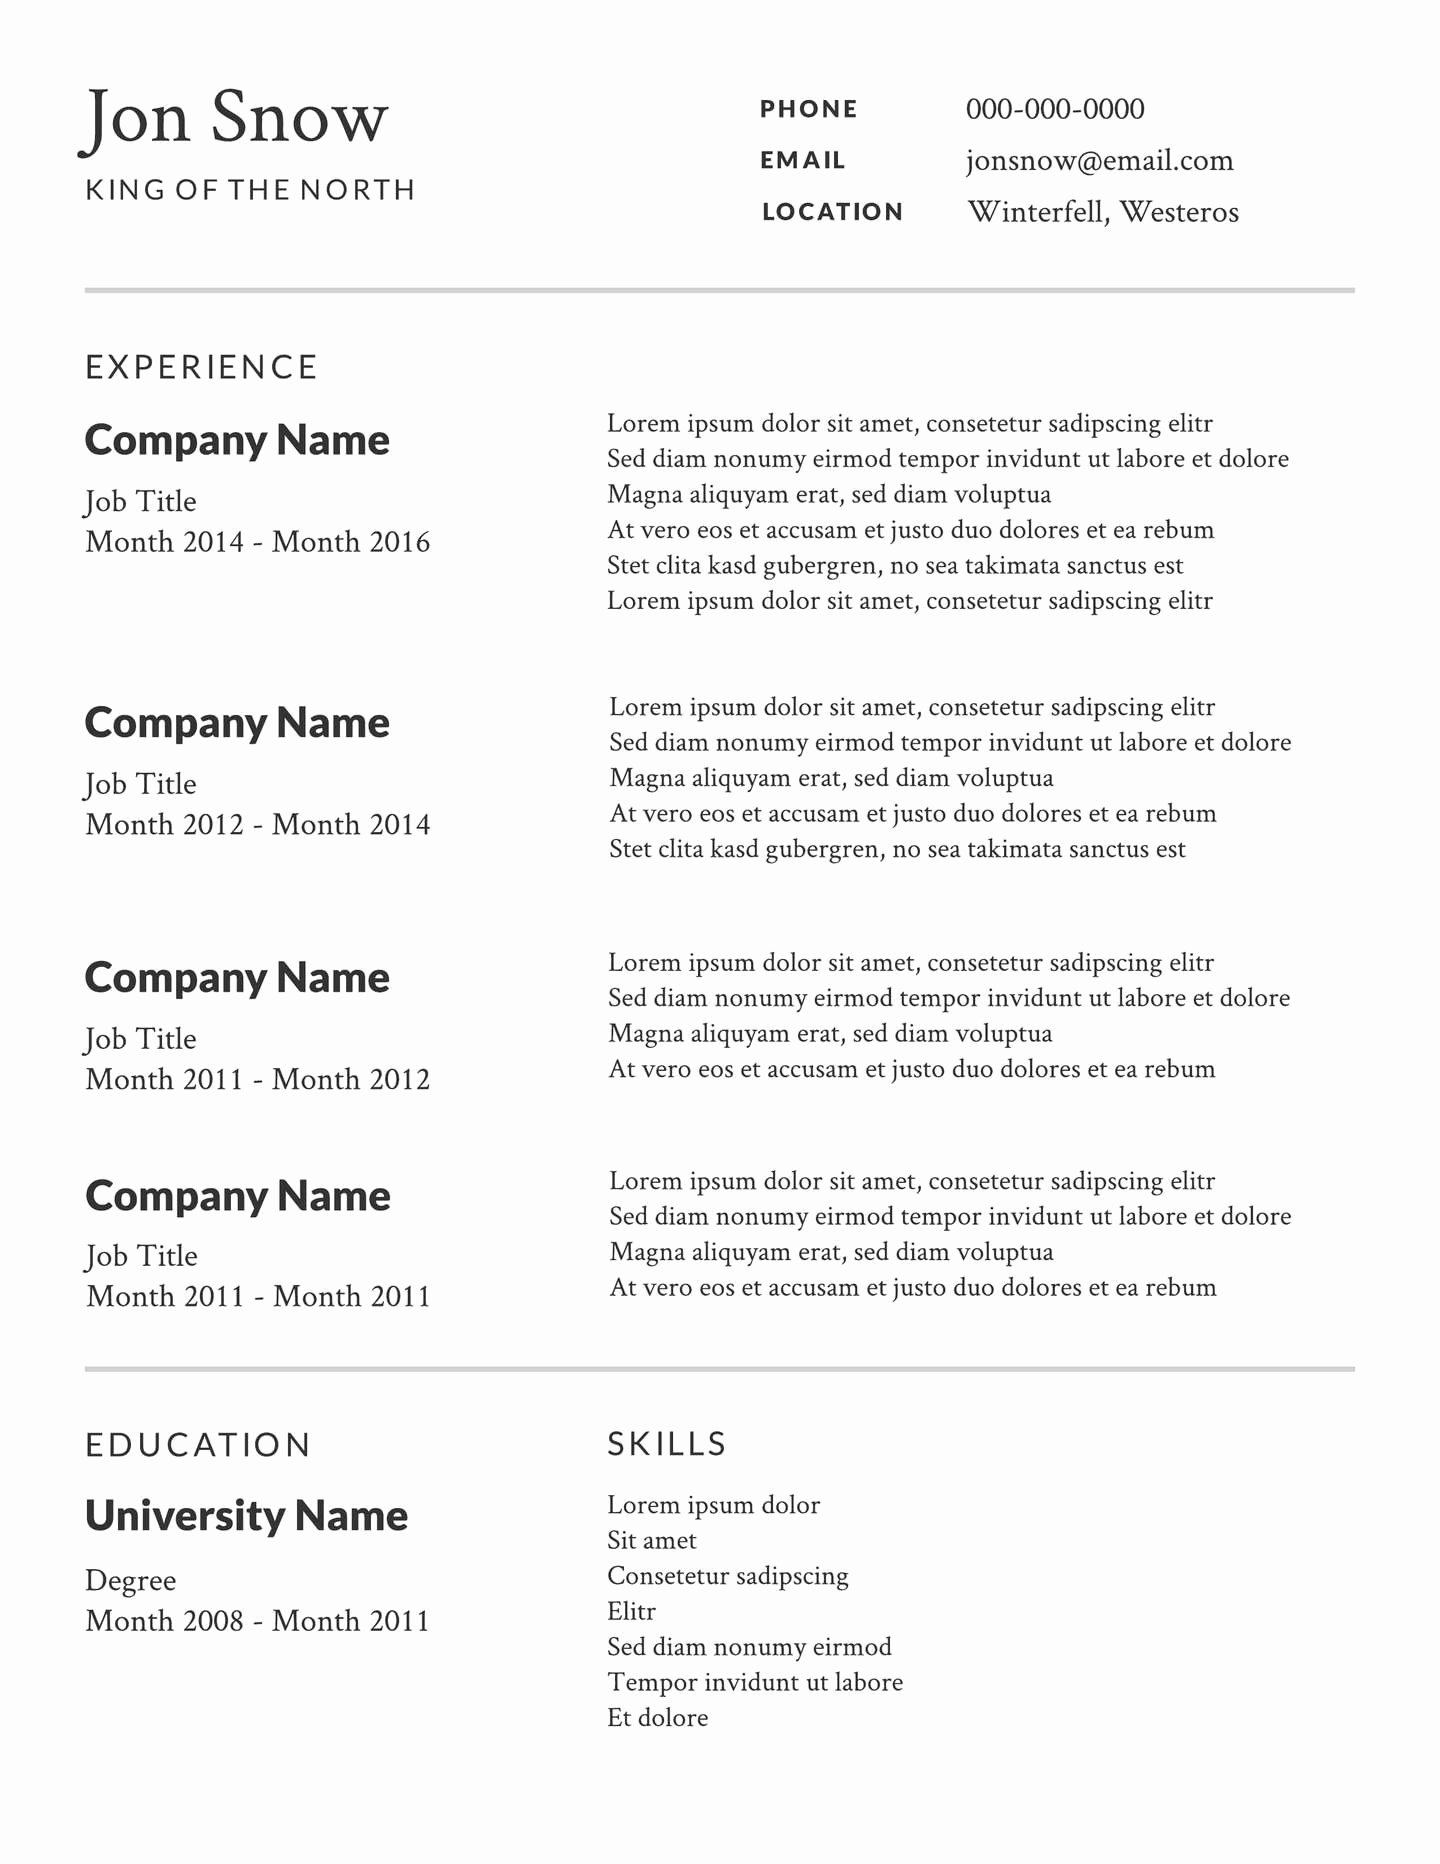 Professional Resume Template Free Fresh Free Simple or Basic Resume Templates